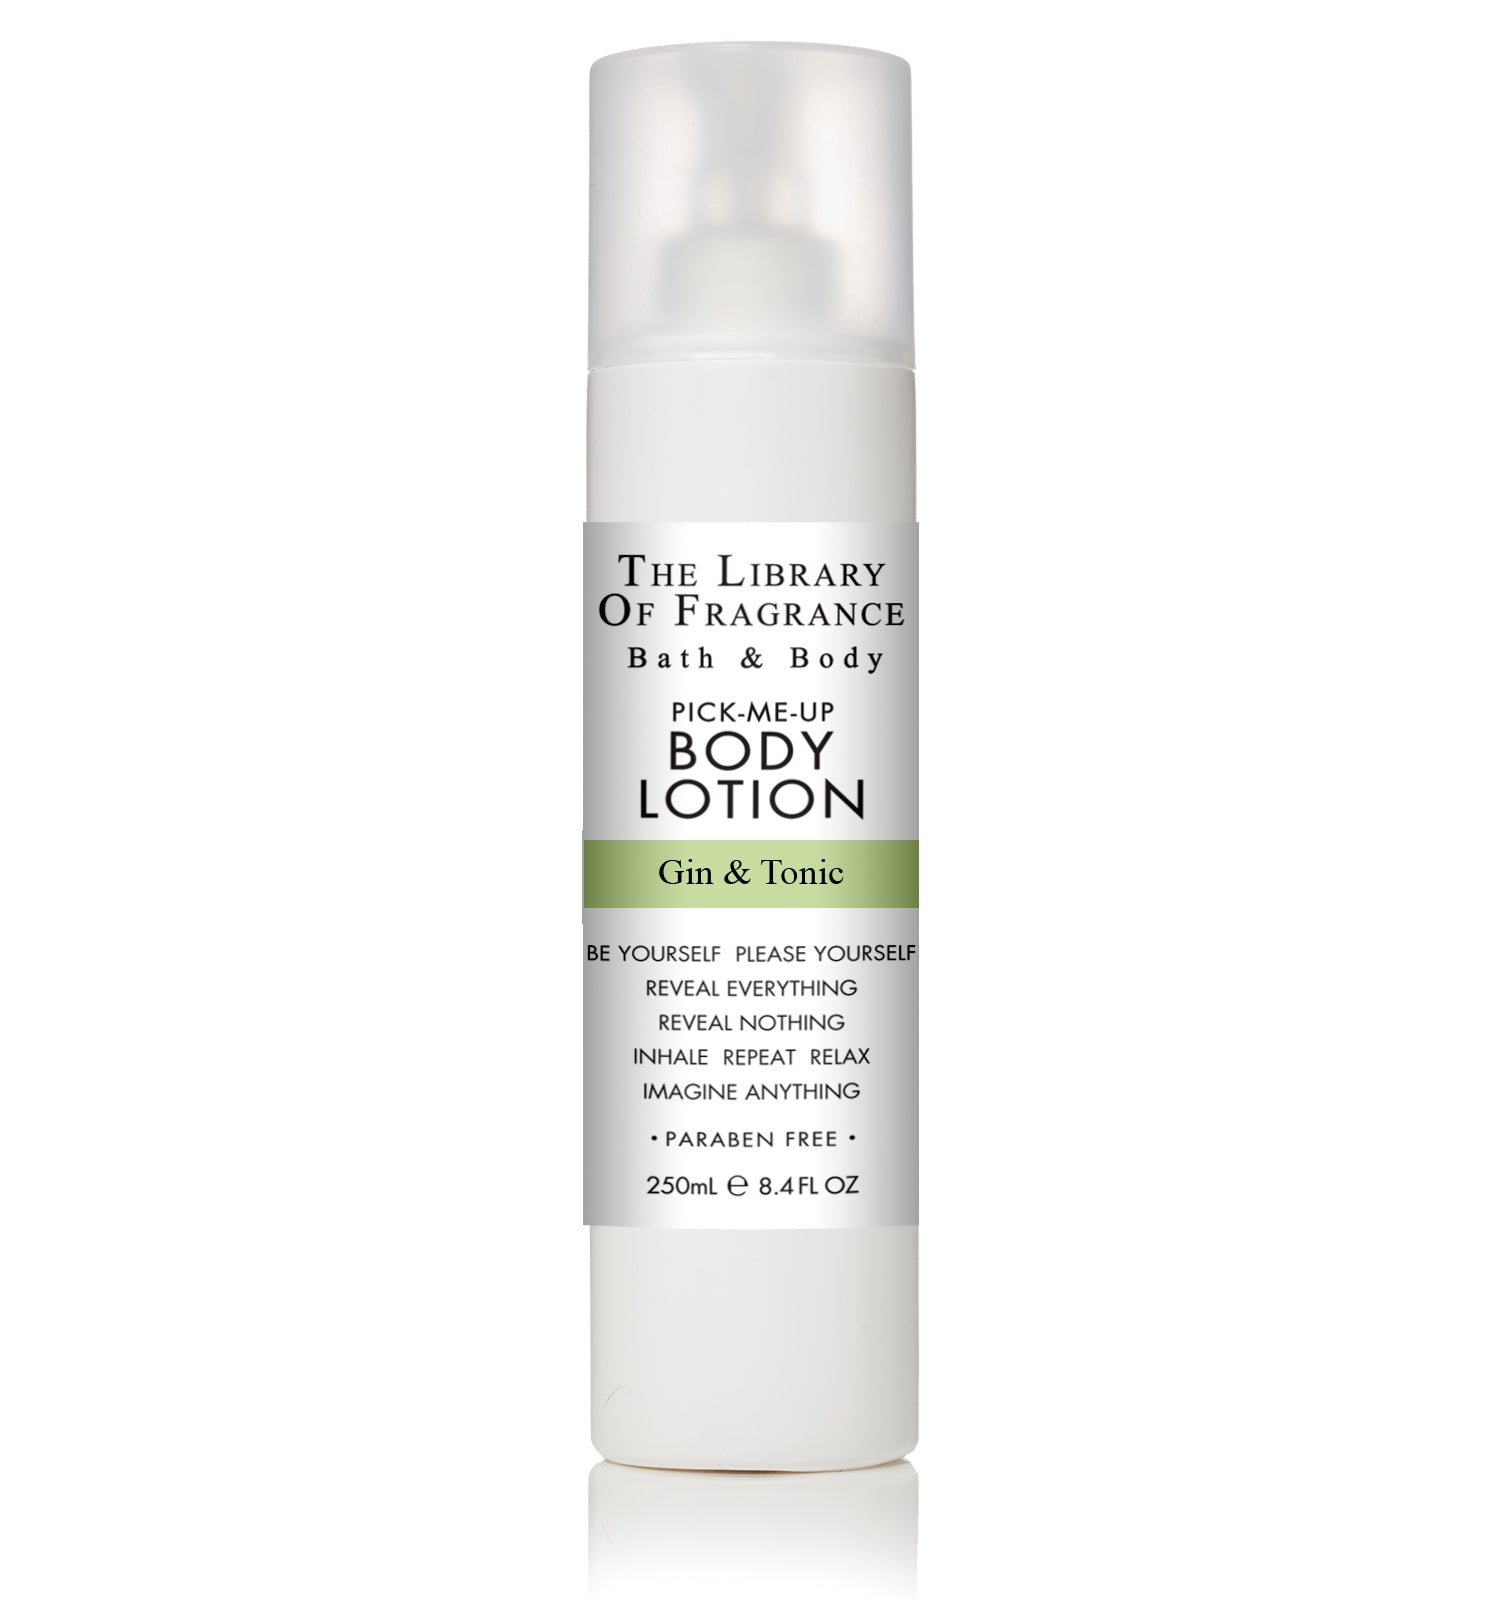 The Library of Fragrance Gin & Tonic Body Lotion 250ml AKA Demeter Fragrance